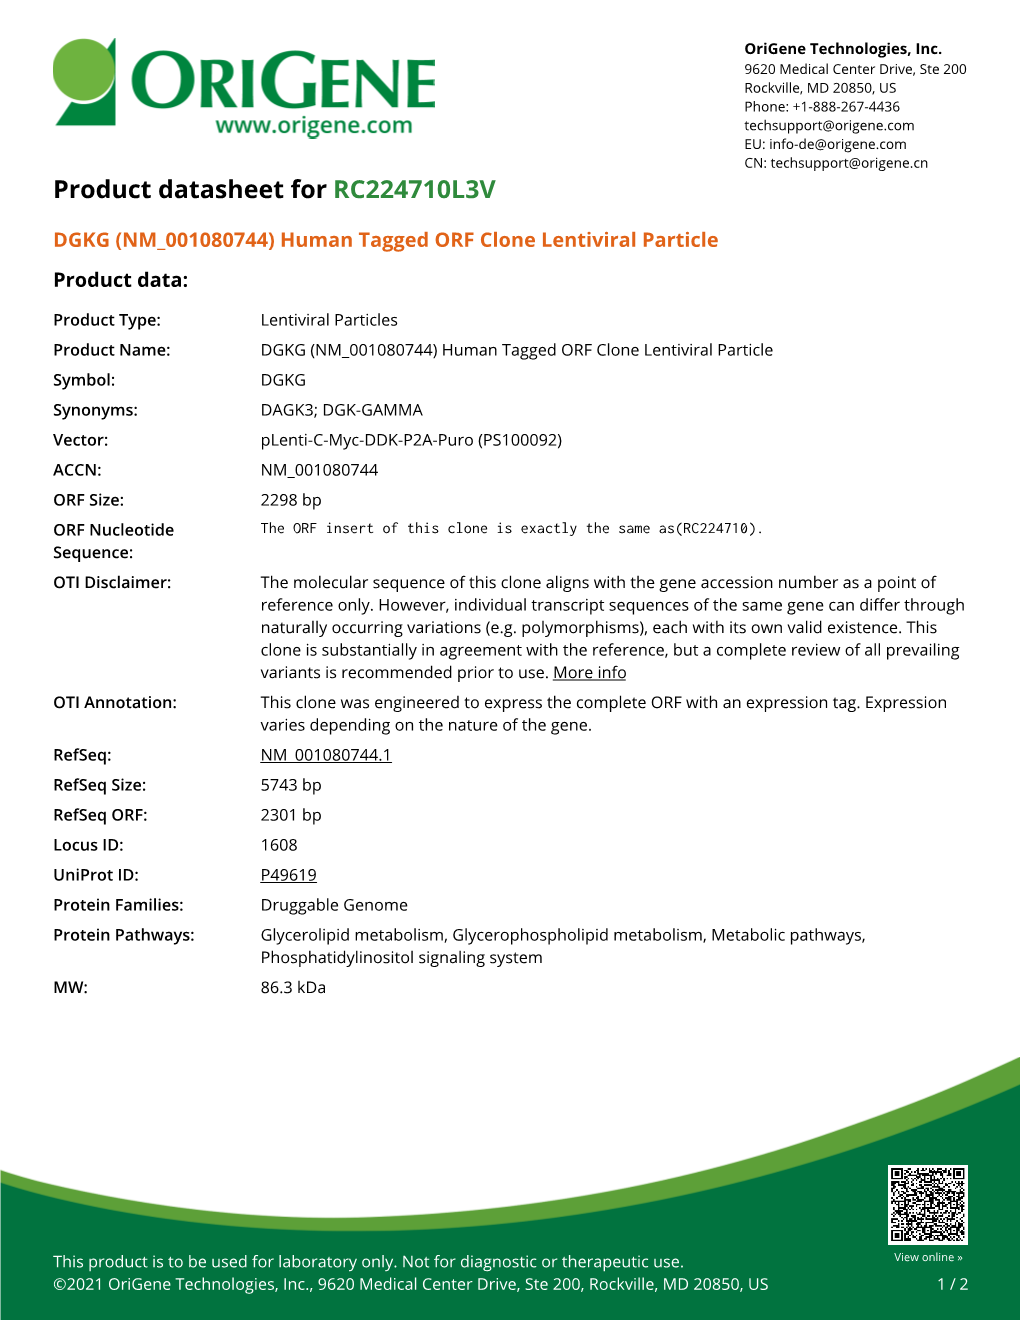 DGKG (NM 001080744) Human Tagged ORF Clone Lentiviral Particle Product Data